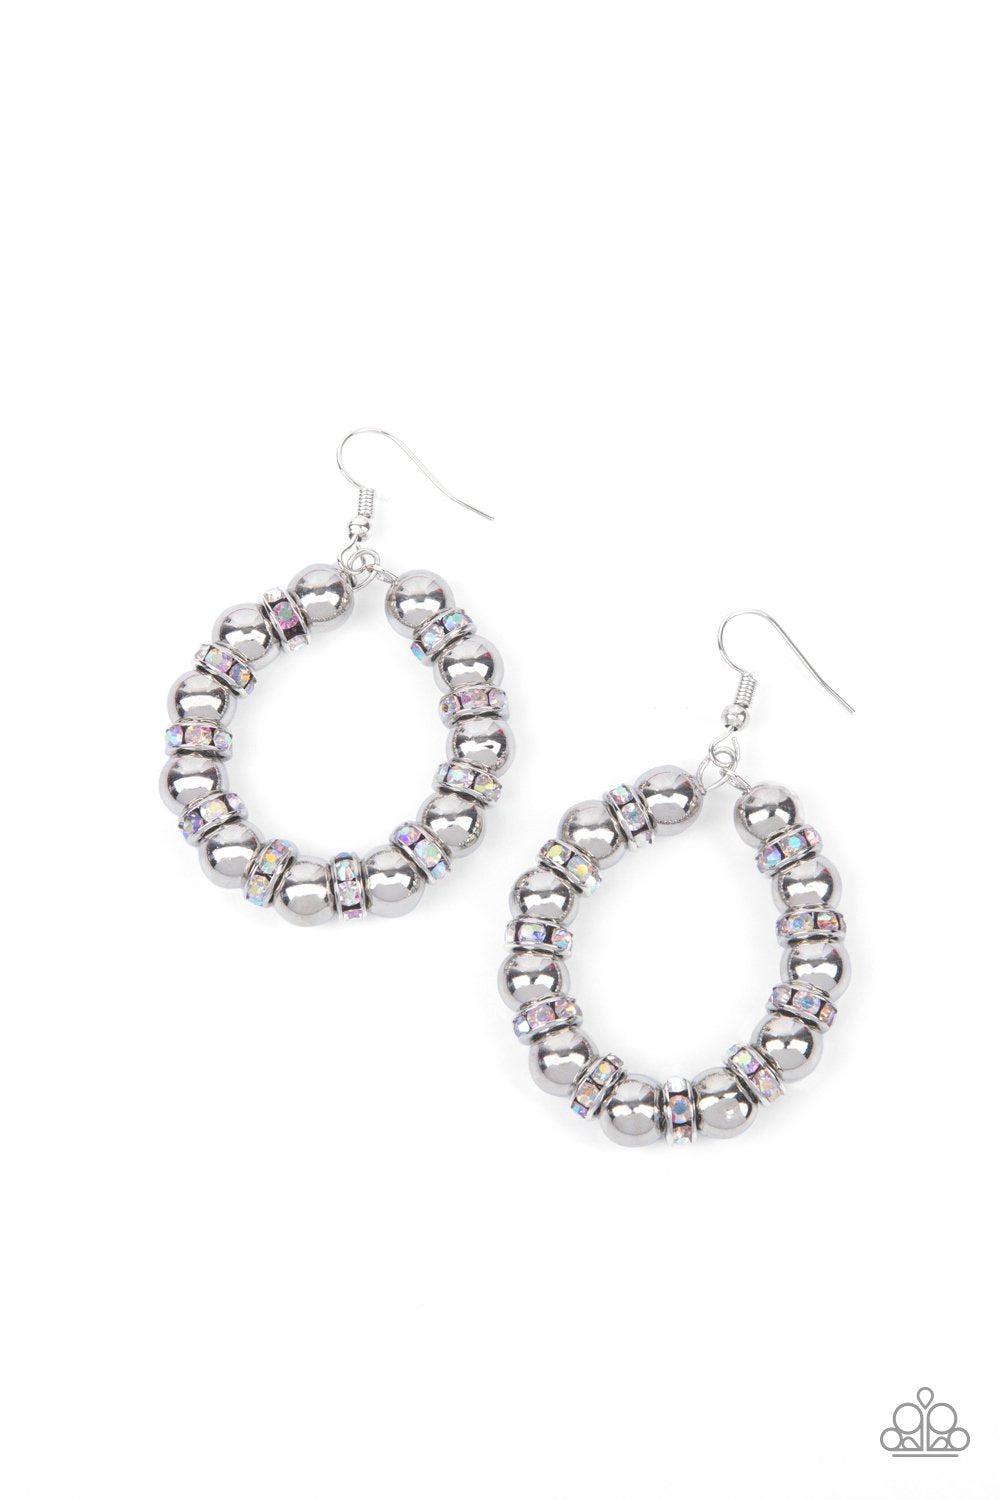 Cosmic Halo Multi Iridescent Earrings - Paparazzi Accessories- lightbox - CarasShop.com - $5 Jewelry by Cara Jewels